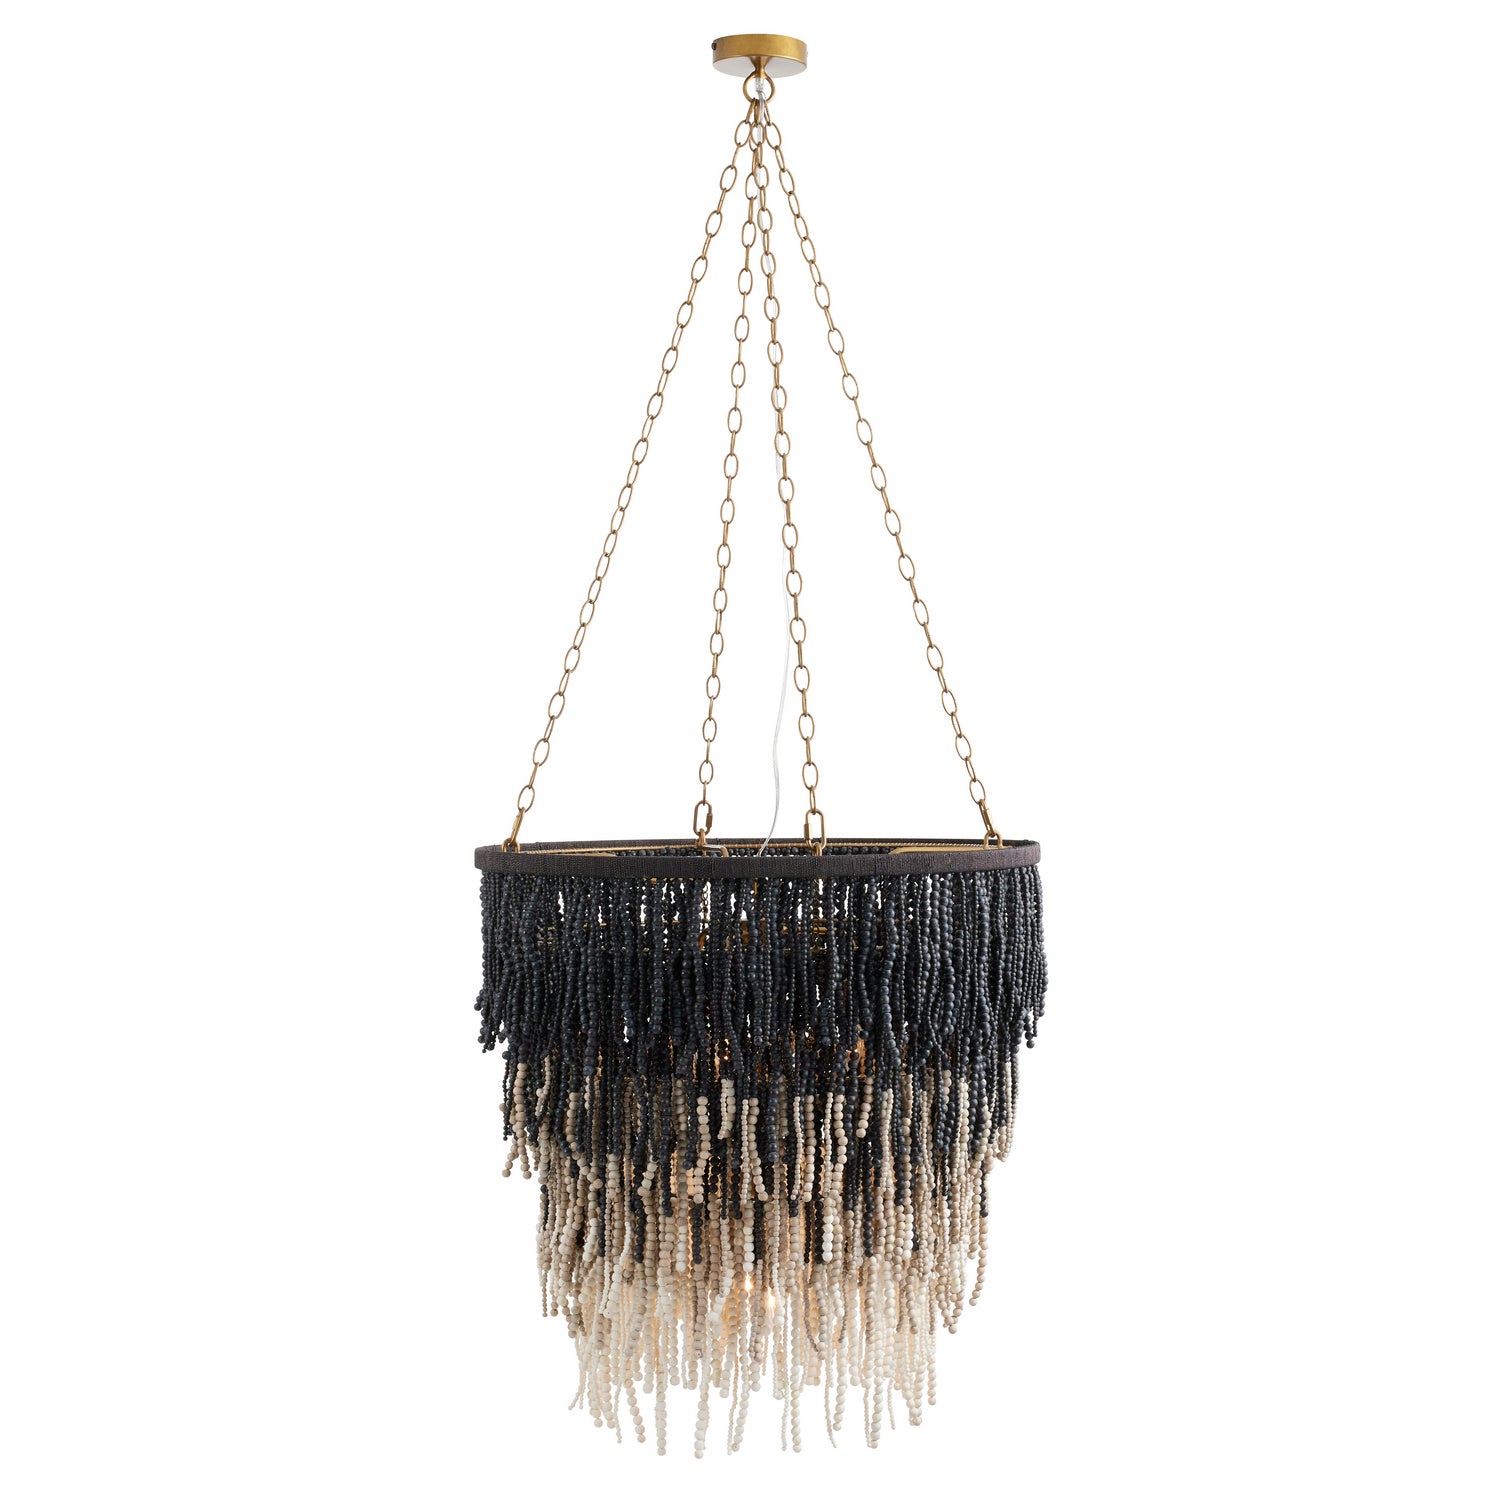 Five Light Chandelier from the Lizzy collection in Black, White and Gray finish